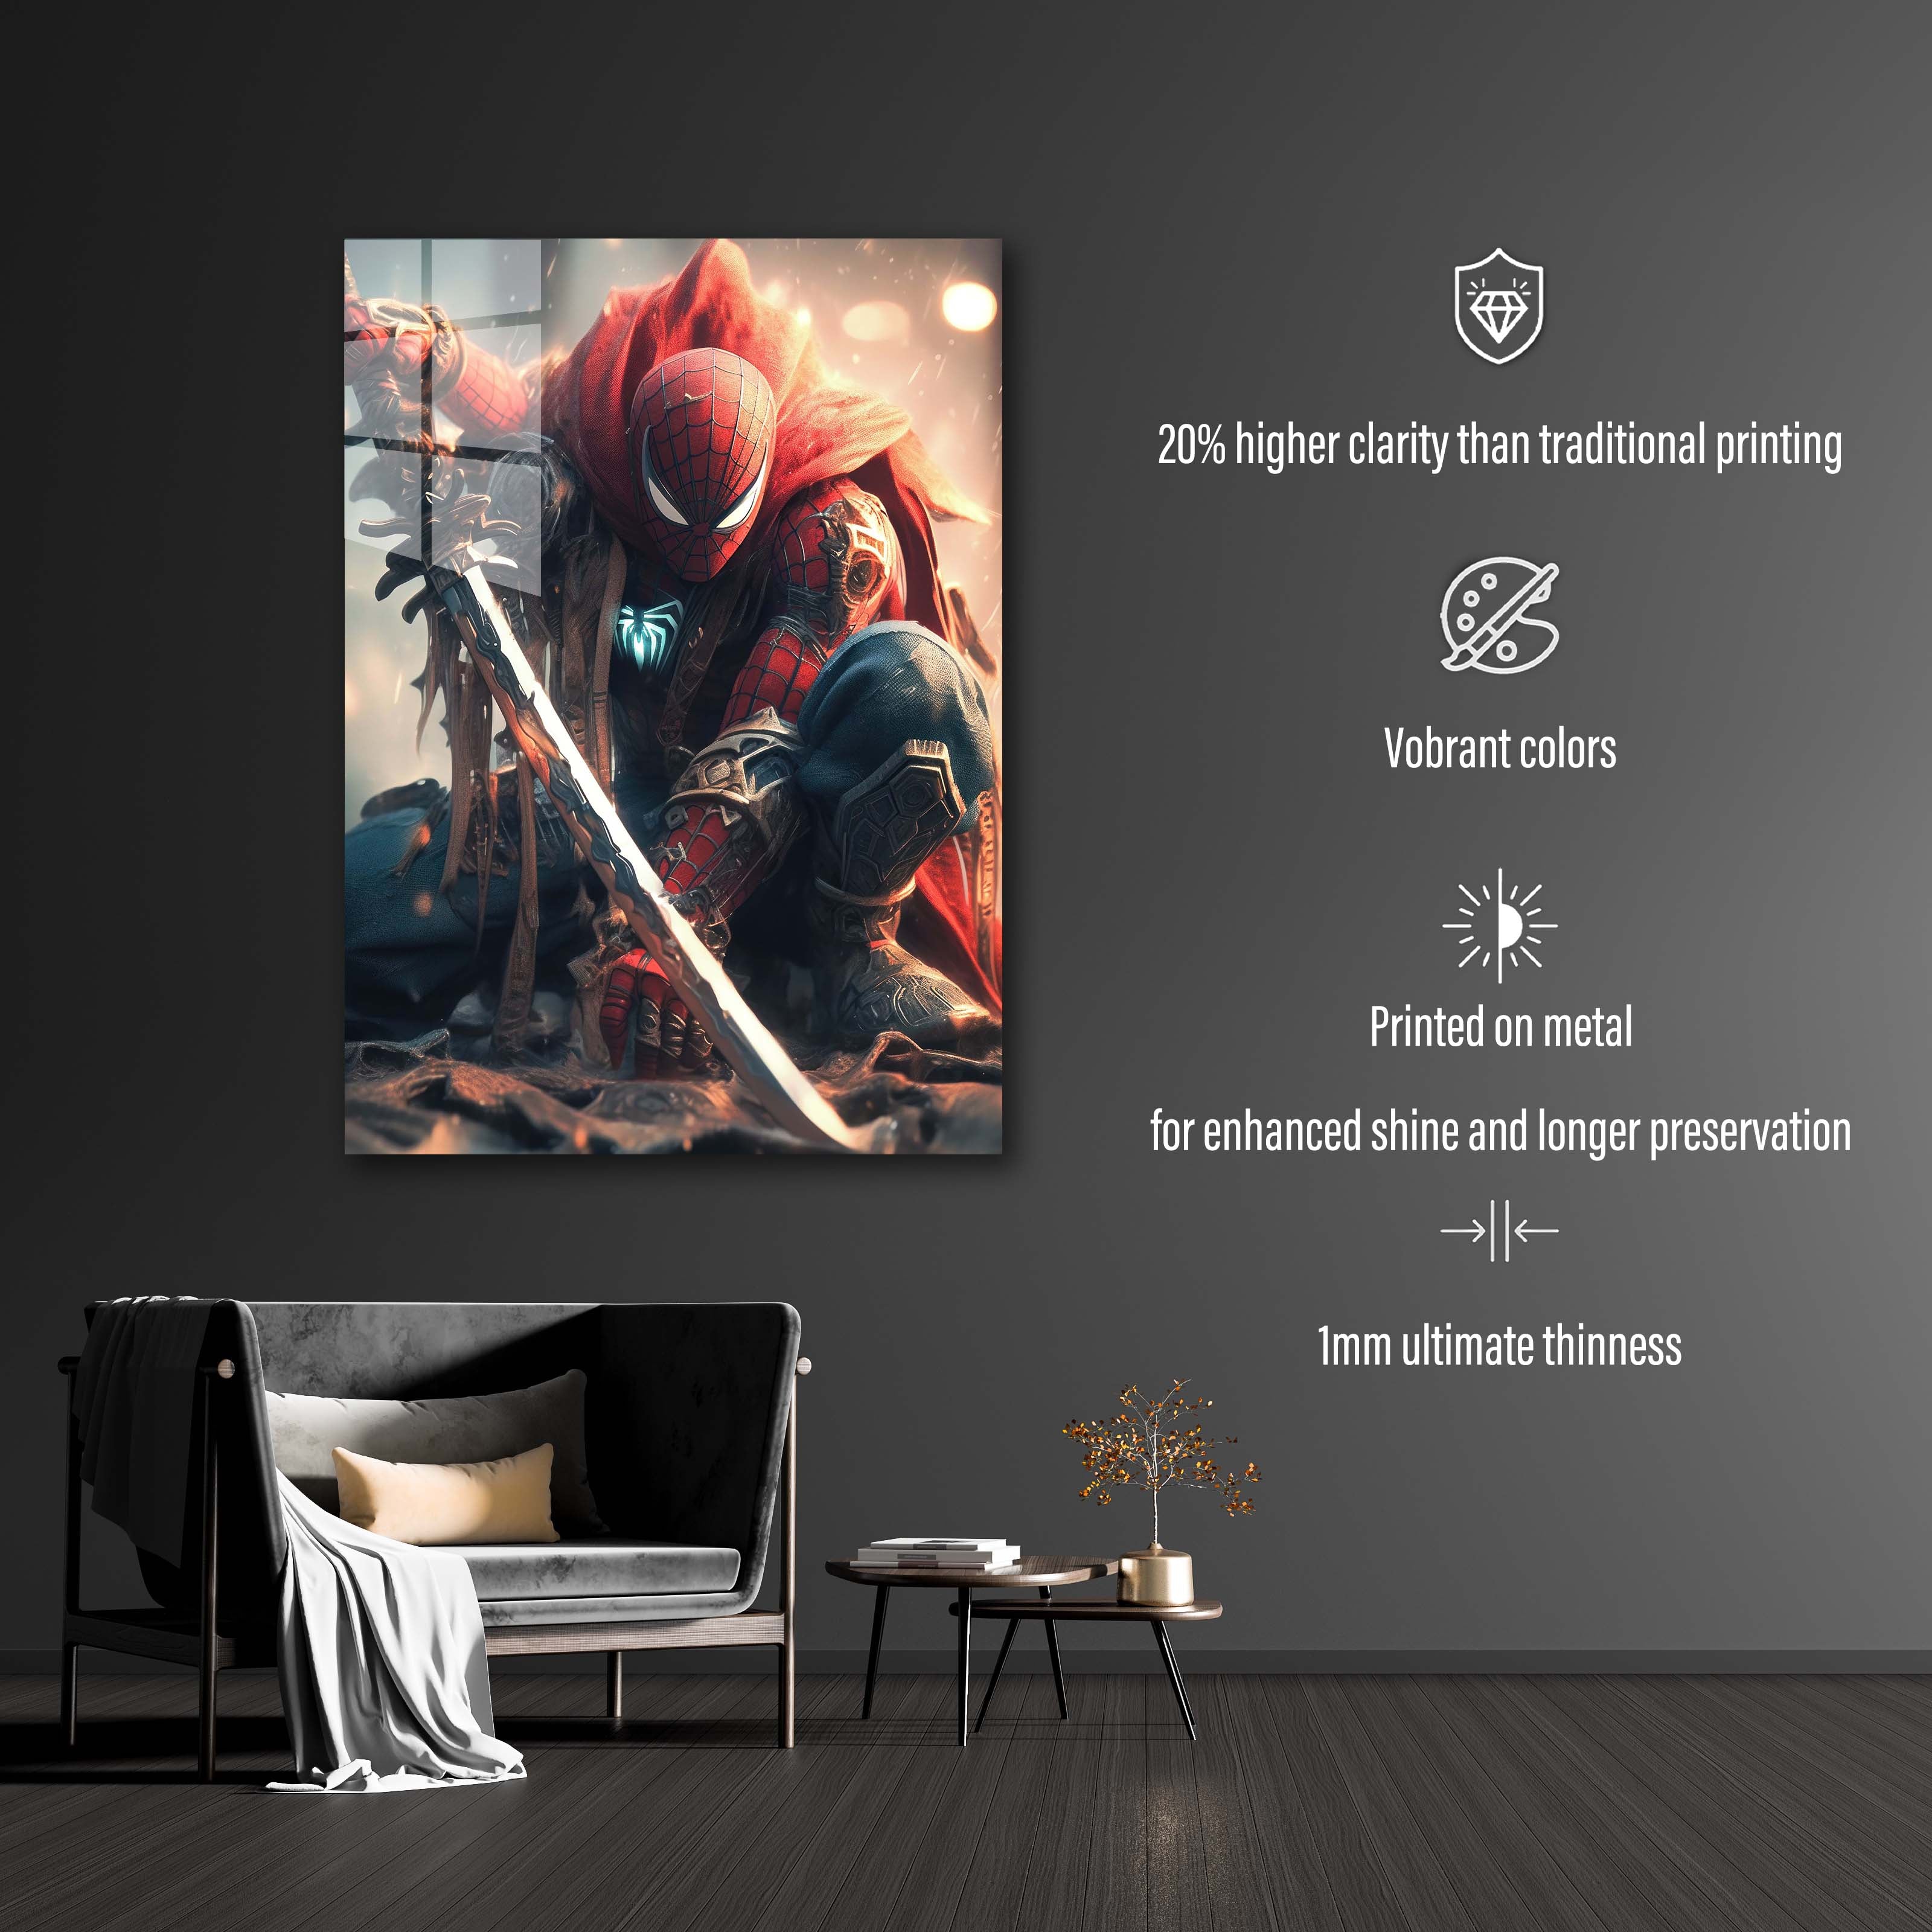 Spiderman as WOW character wallpaper by @visinaire.ai-designed by @visinaire.ai